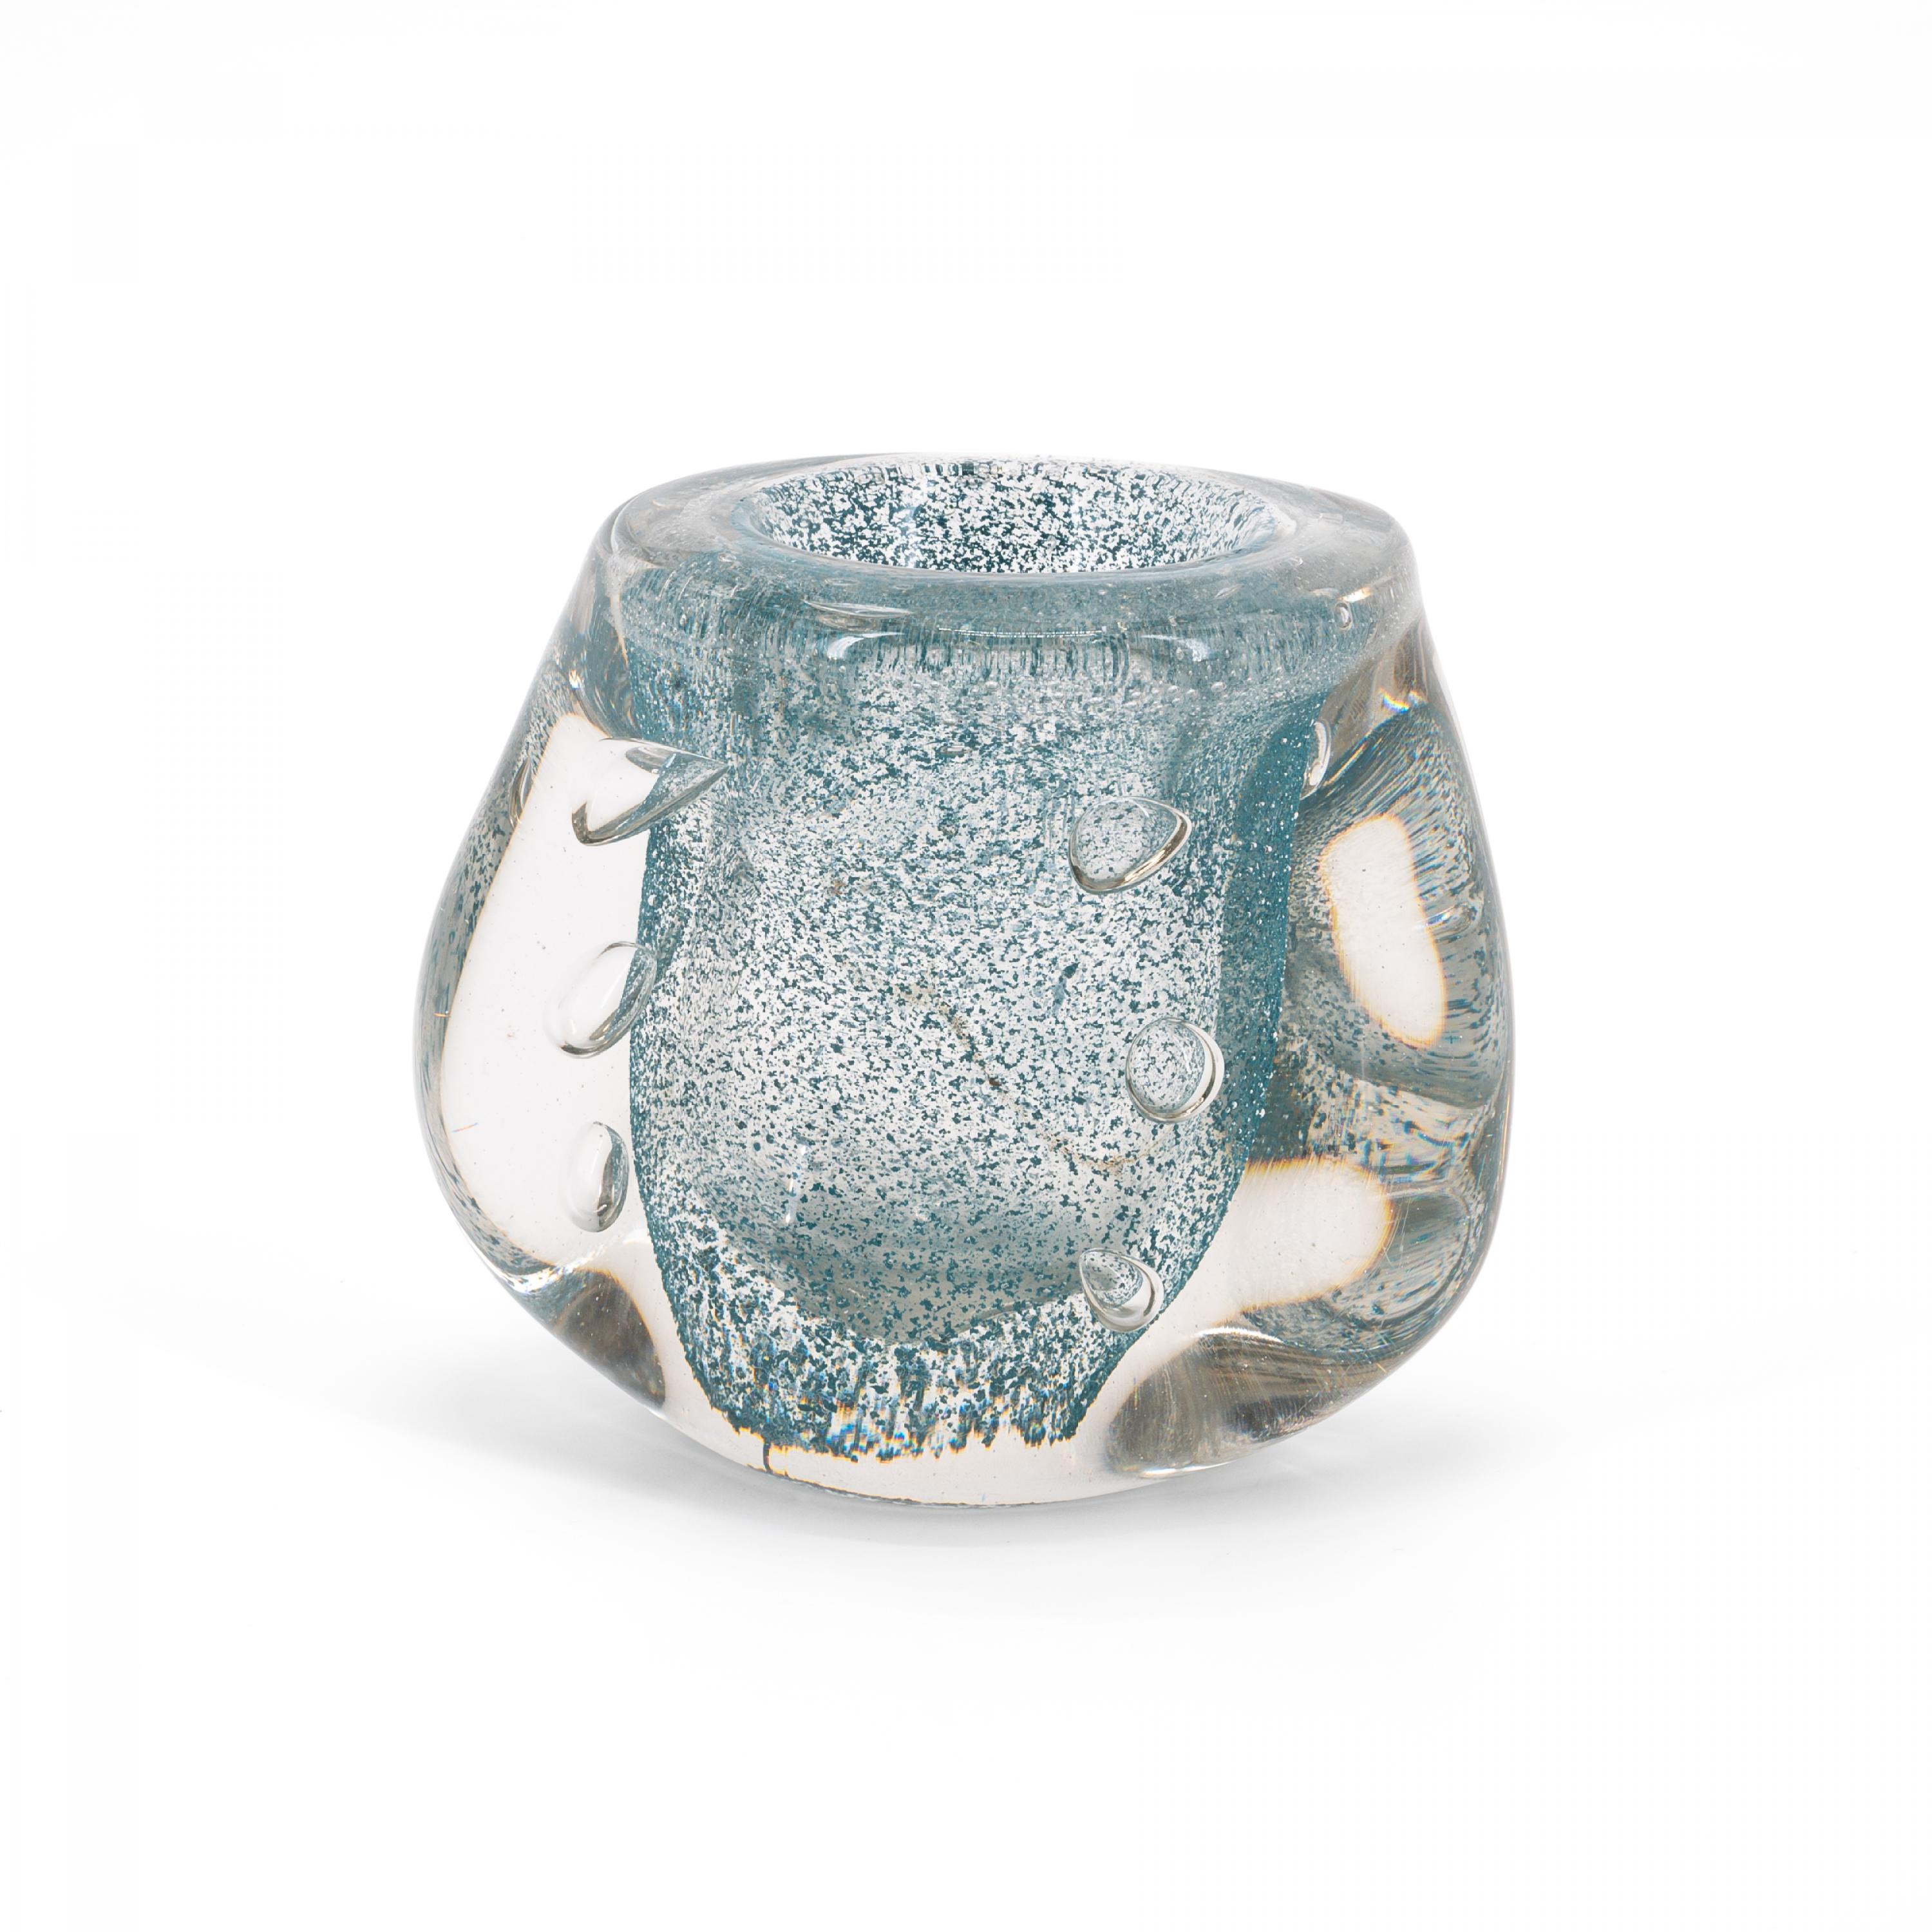 GLASS VASE WITH TURQUOISE BLUE POWDER INCLUSIONS